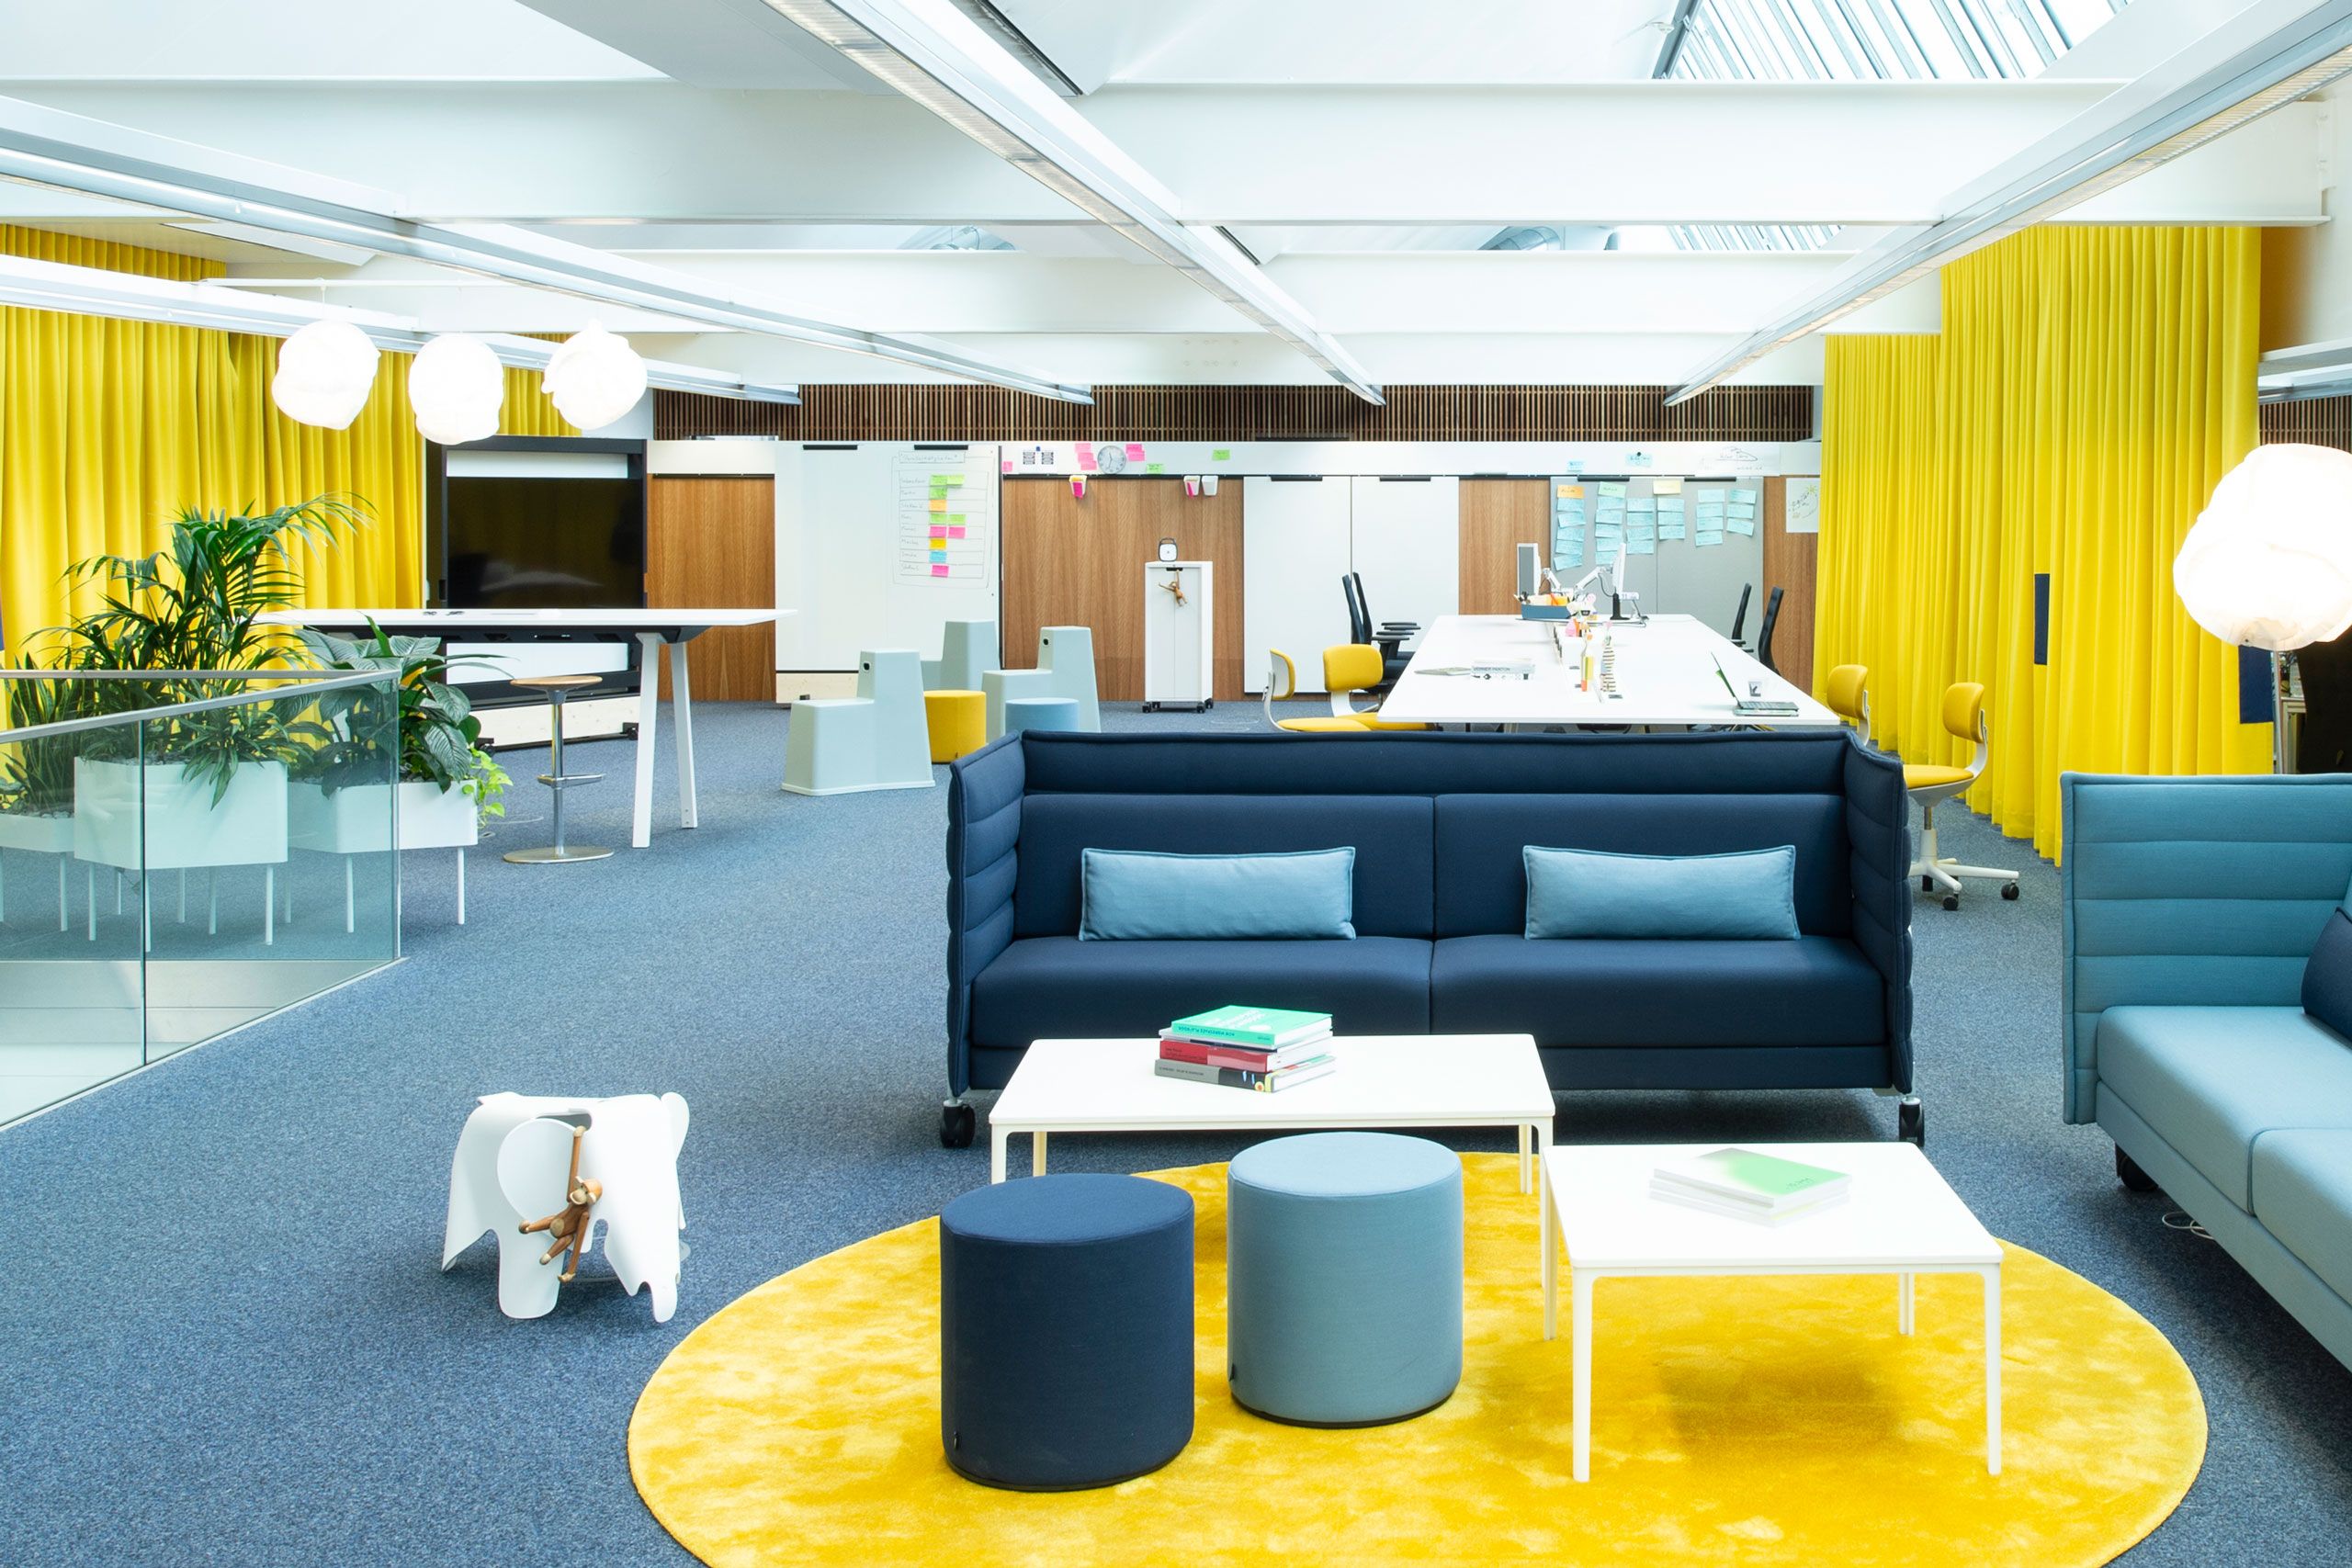 Modern office interior design with yellow LORD curtains from Création Baumann for acoustic optimization and room separation.